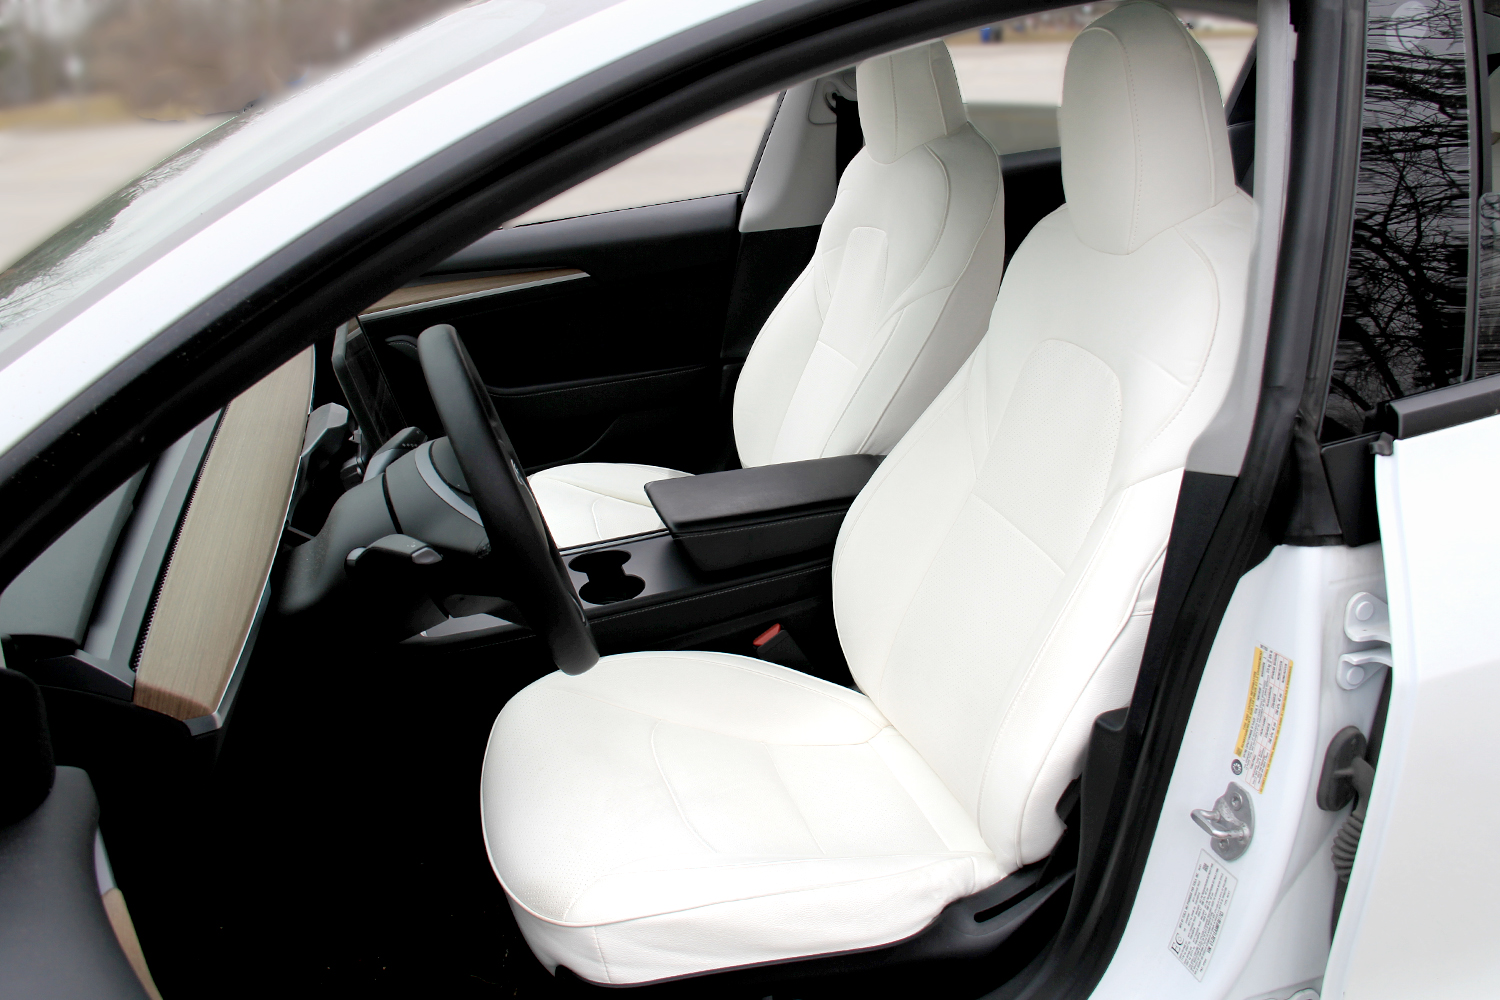 https://tesloid.com/wp-content/uploads/2023/03/Tesla_Model_Y3_seat_covers_white_1.jpg